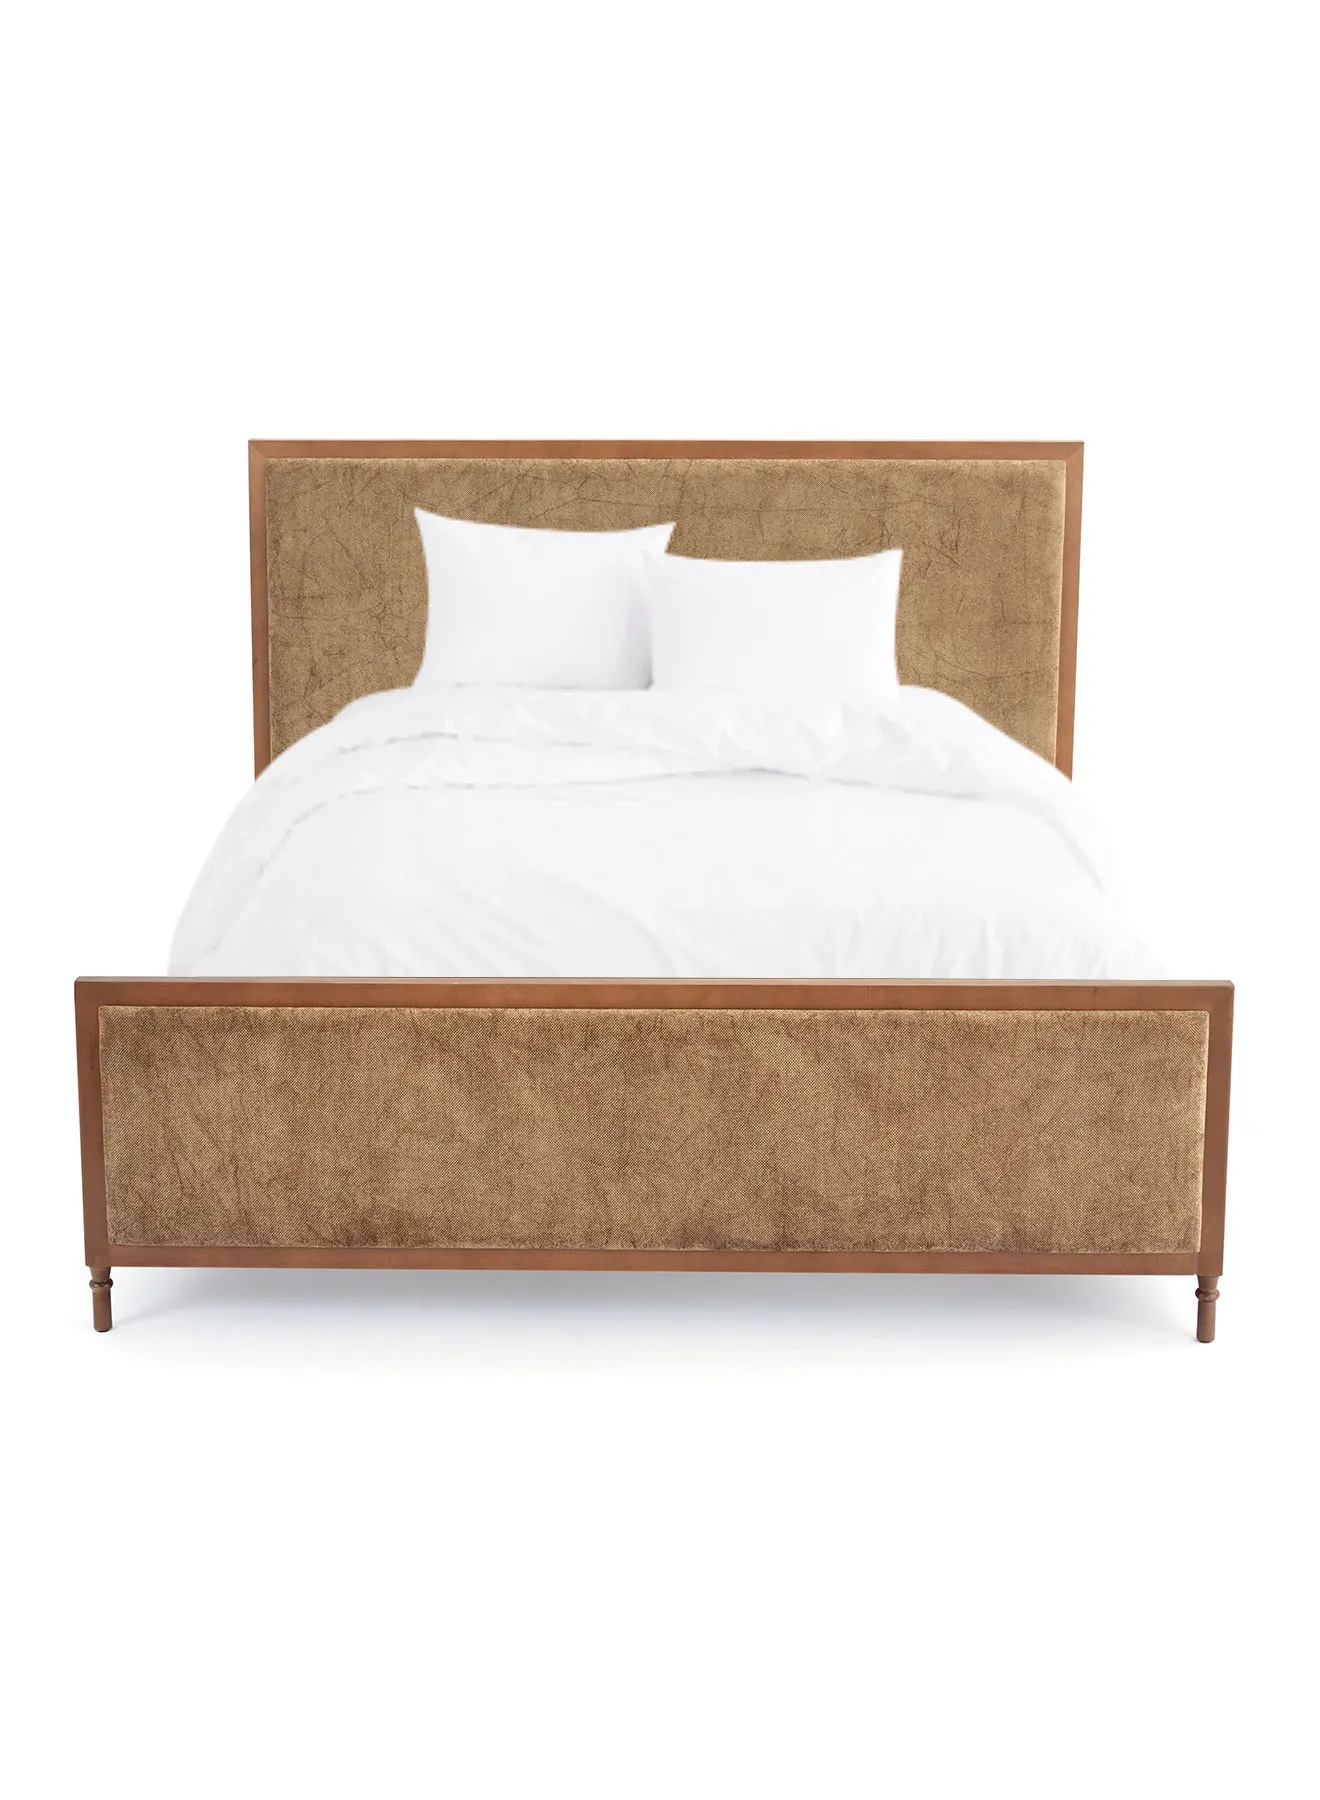 ebb & flow Bed Frame Luxurious - Queen Size Bed - Elegant Stud Collection - Brown Color - Size 1860 X2080 X 1300mm - Luxurious Home